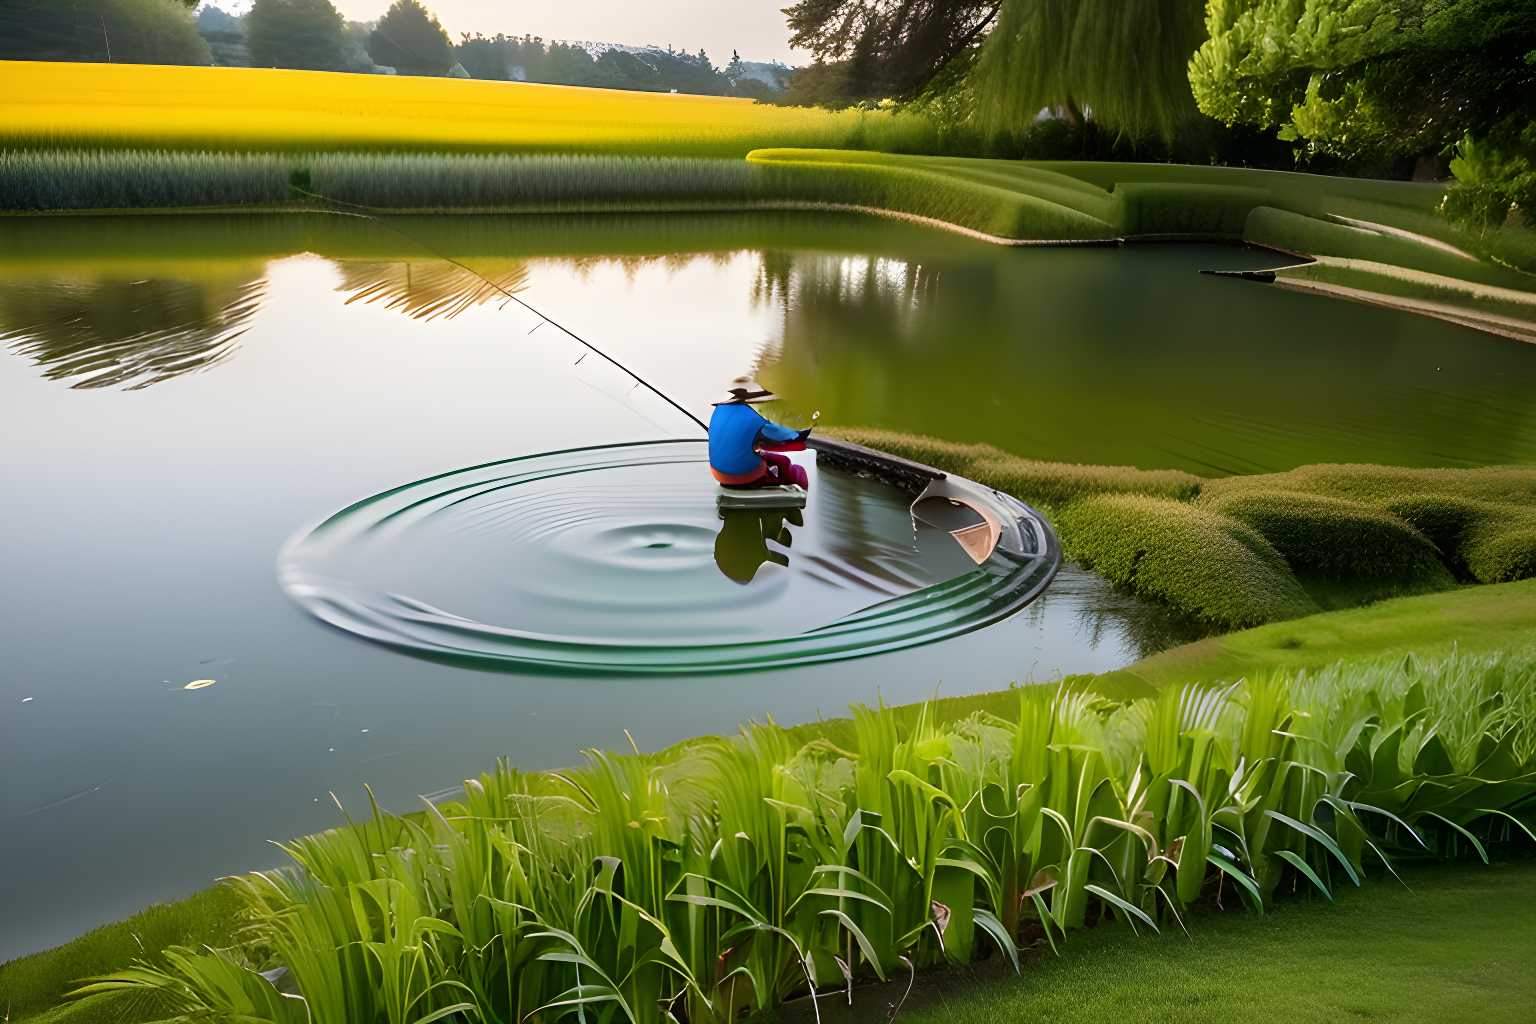 Fishing in the pond